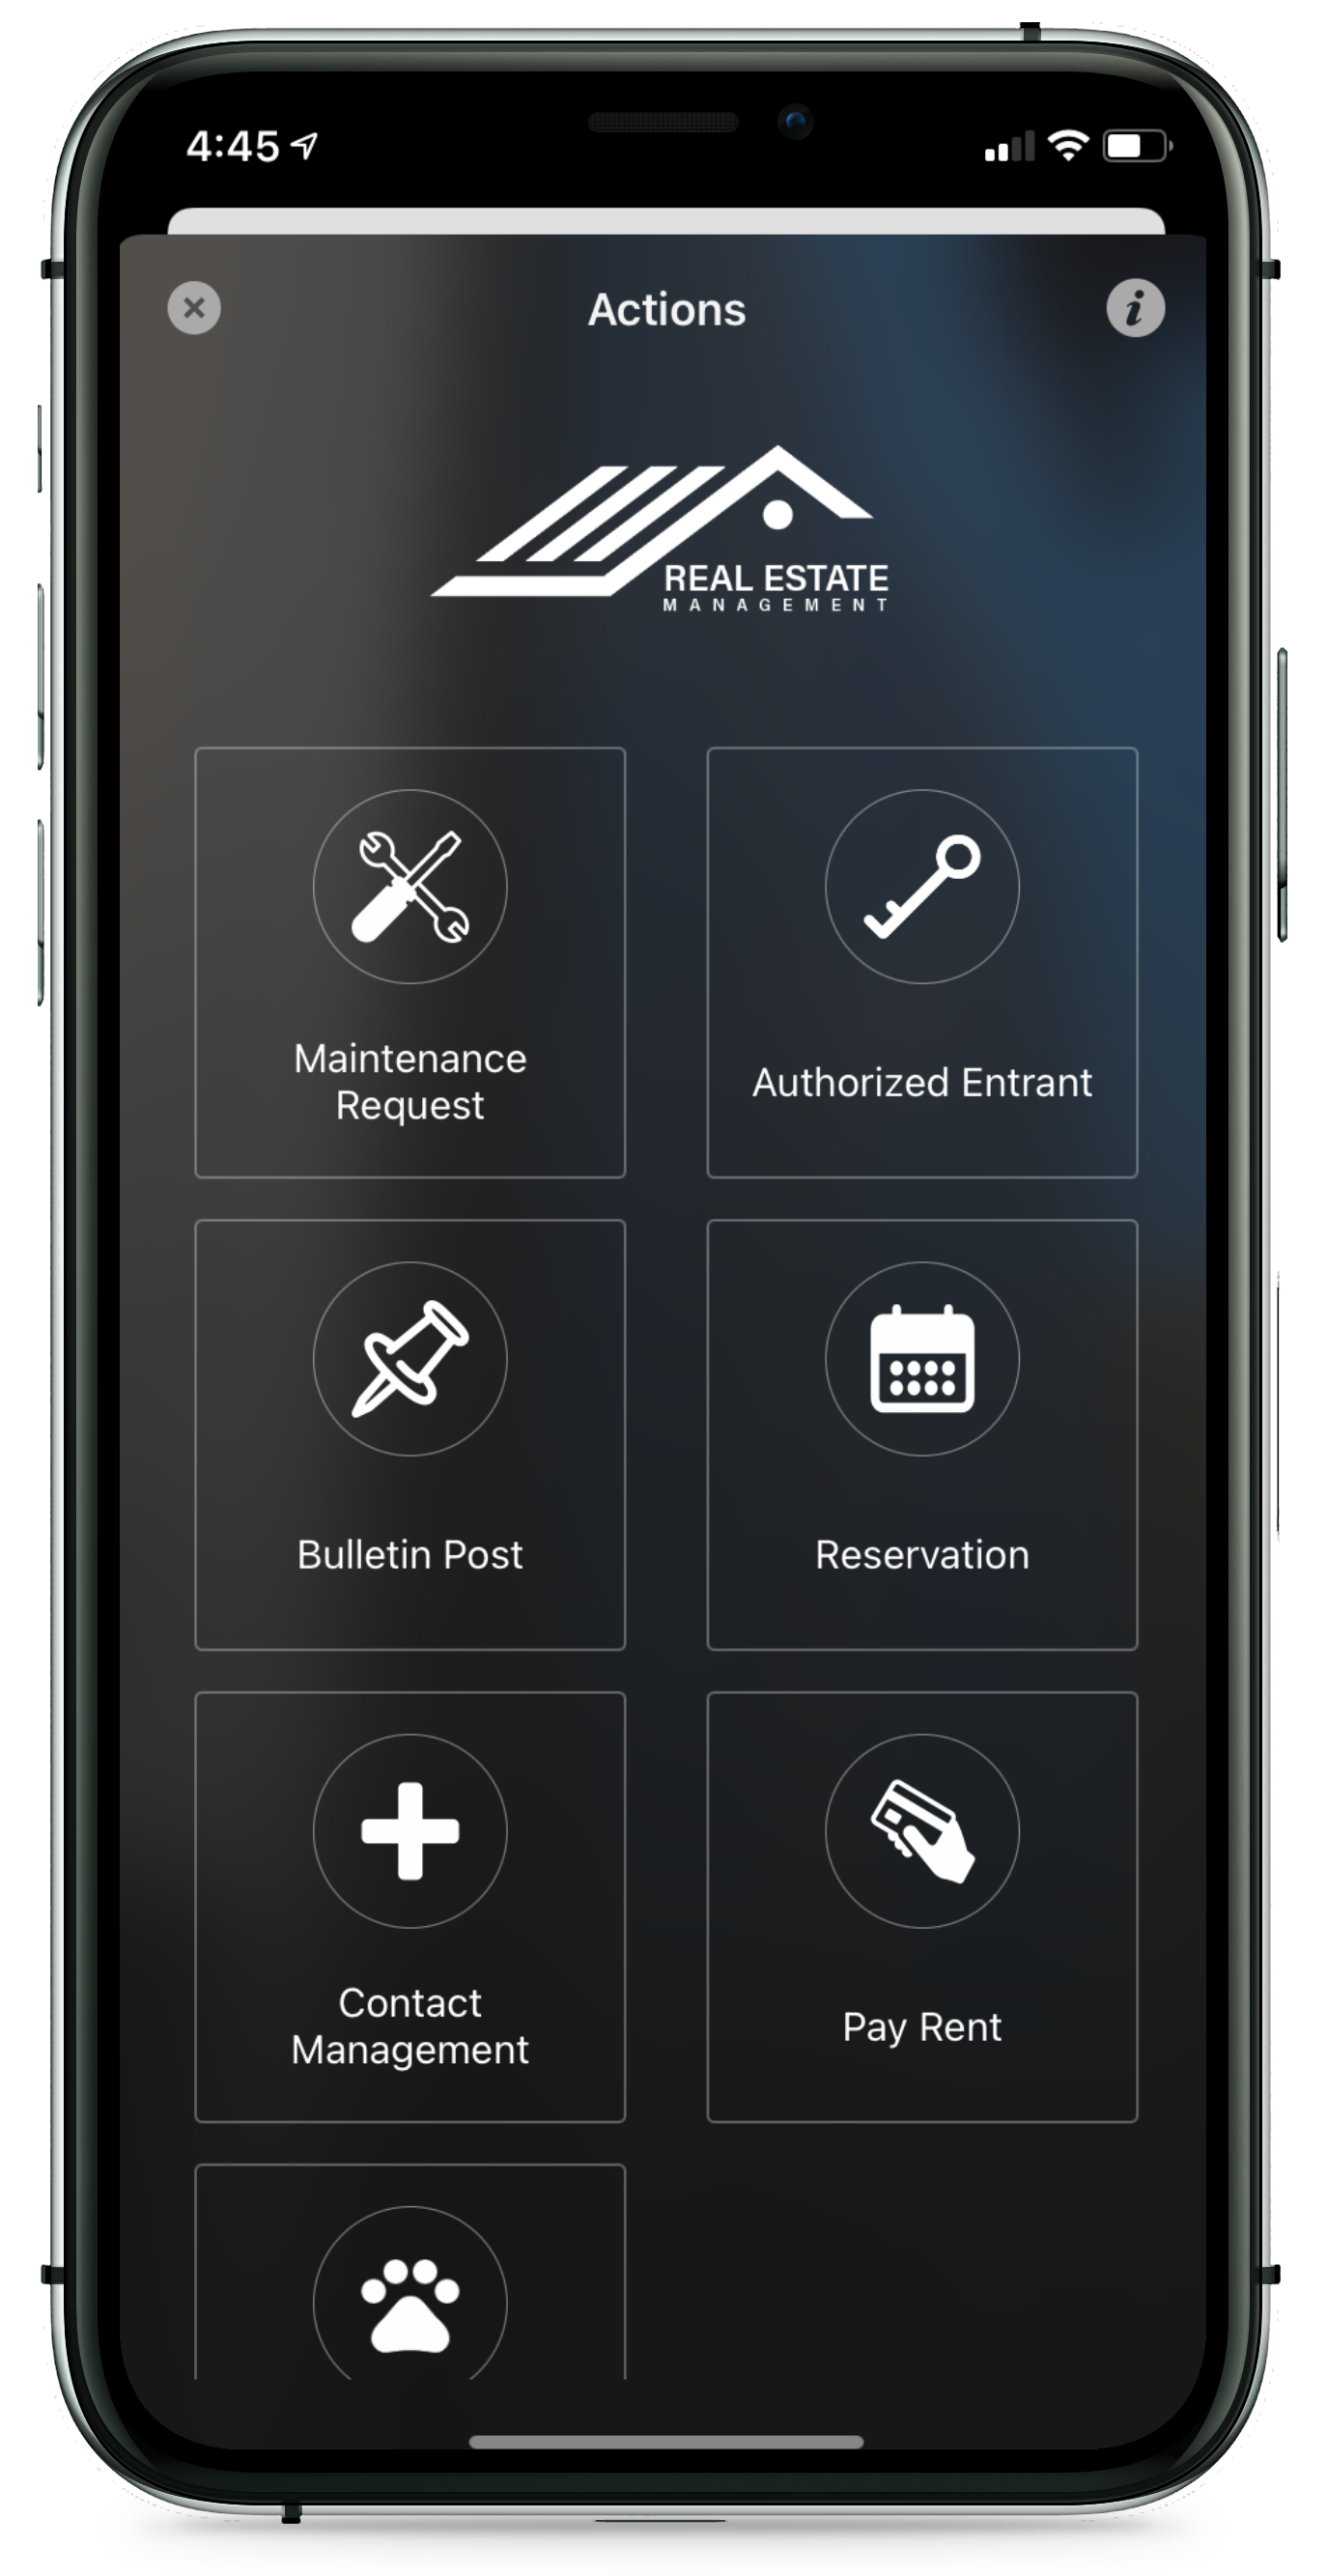 Zego Software - The mobile-first resident experience Zego Mobile Doorman app is a comprehensive solution for communication, payments, maintenance, packages, and other pressing needs